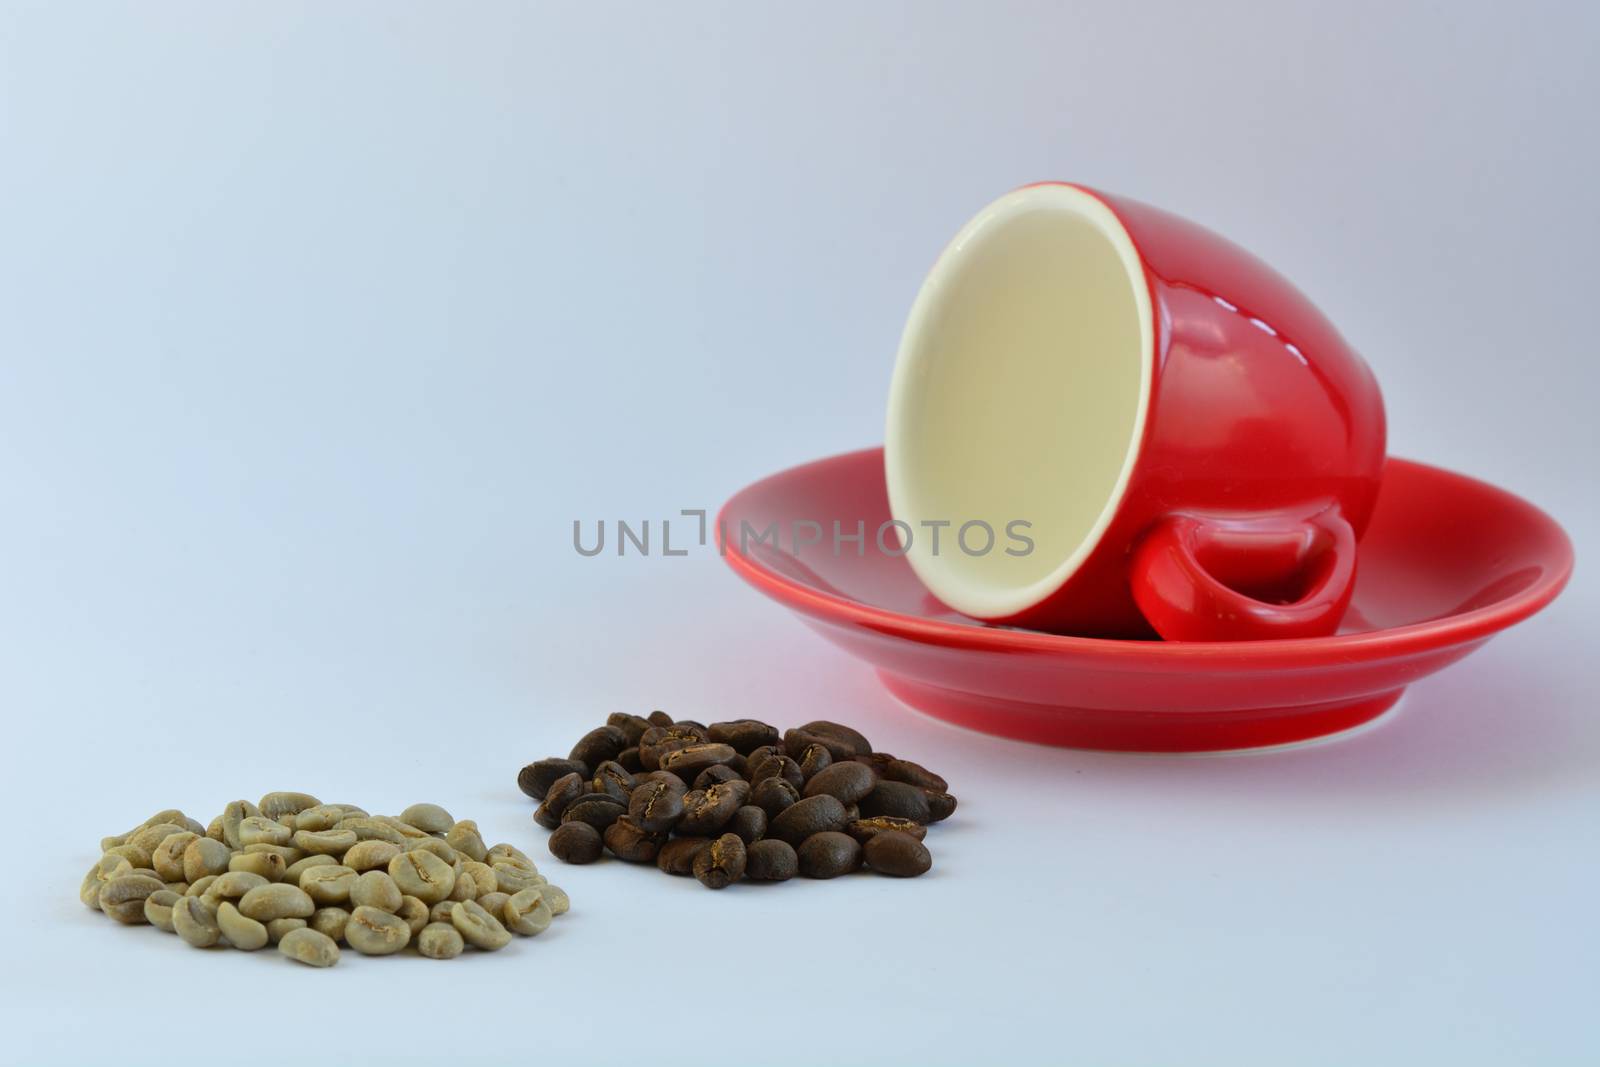 A close-up photo of a bright red espresso coffee cup, some green coffee beans and some roasted coffee beans on white background.